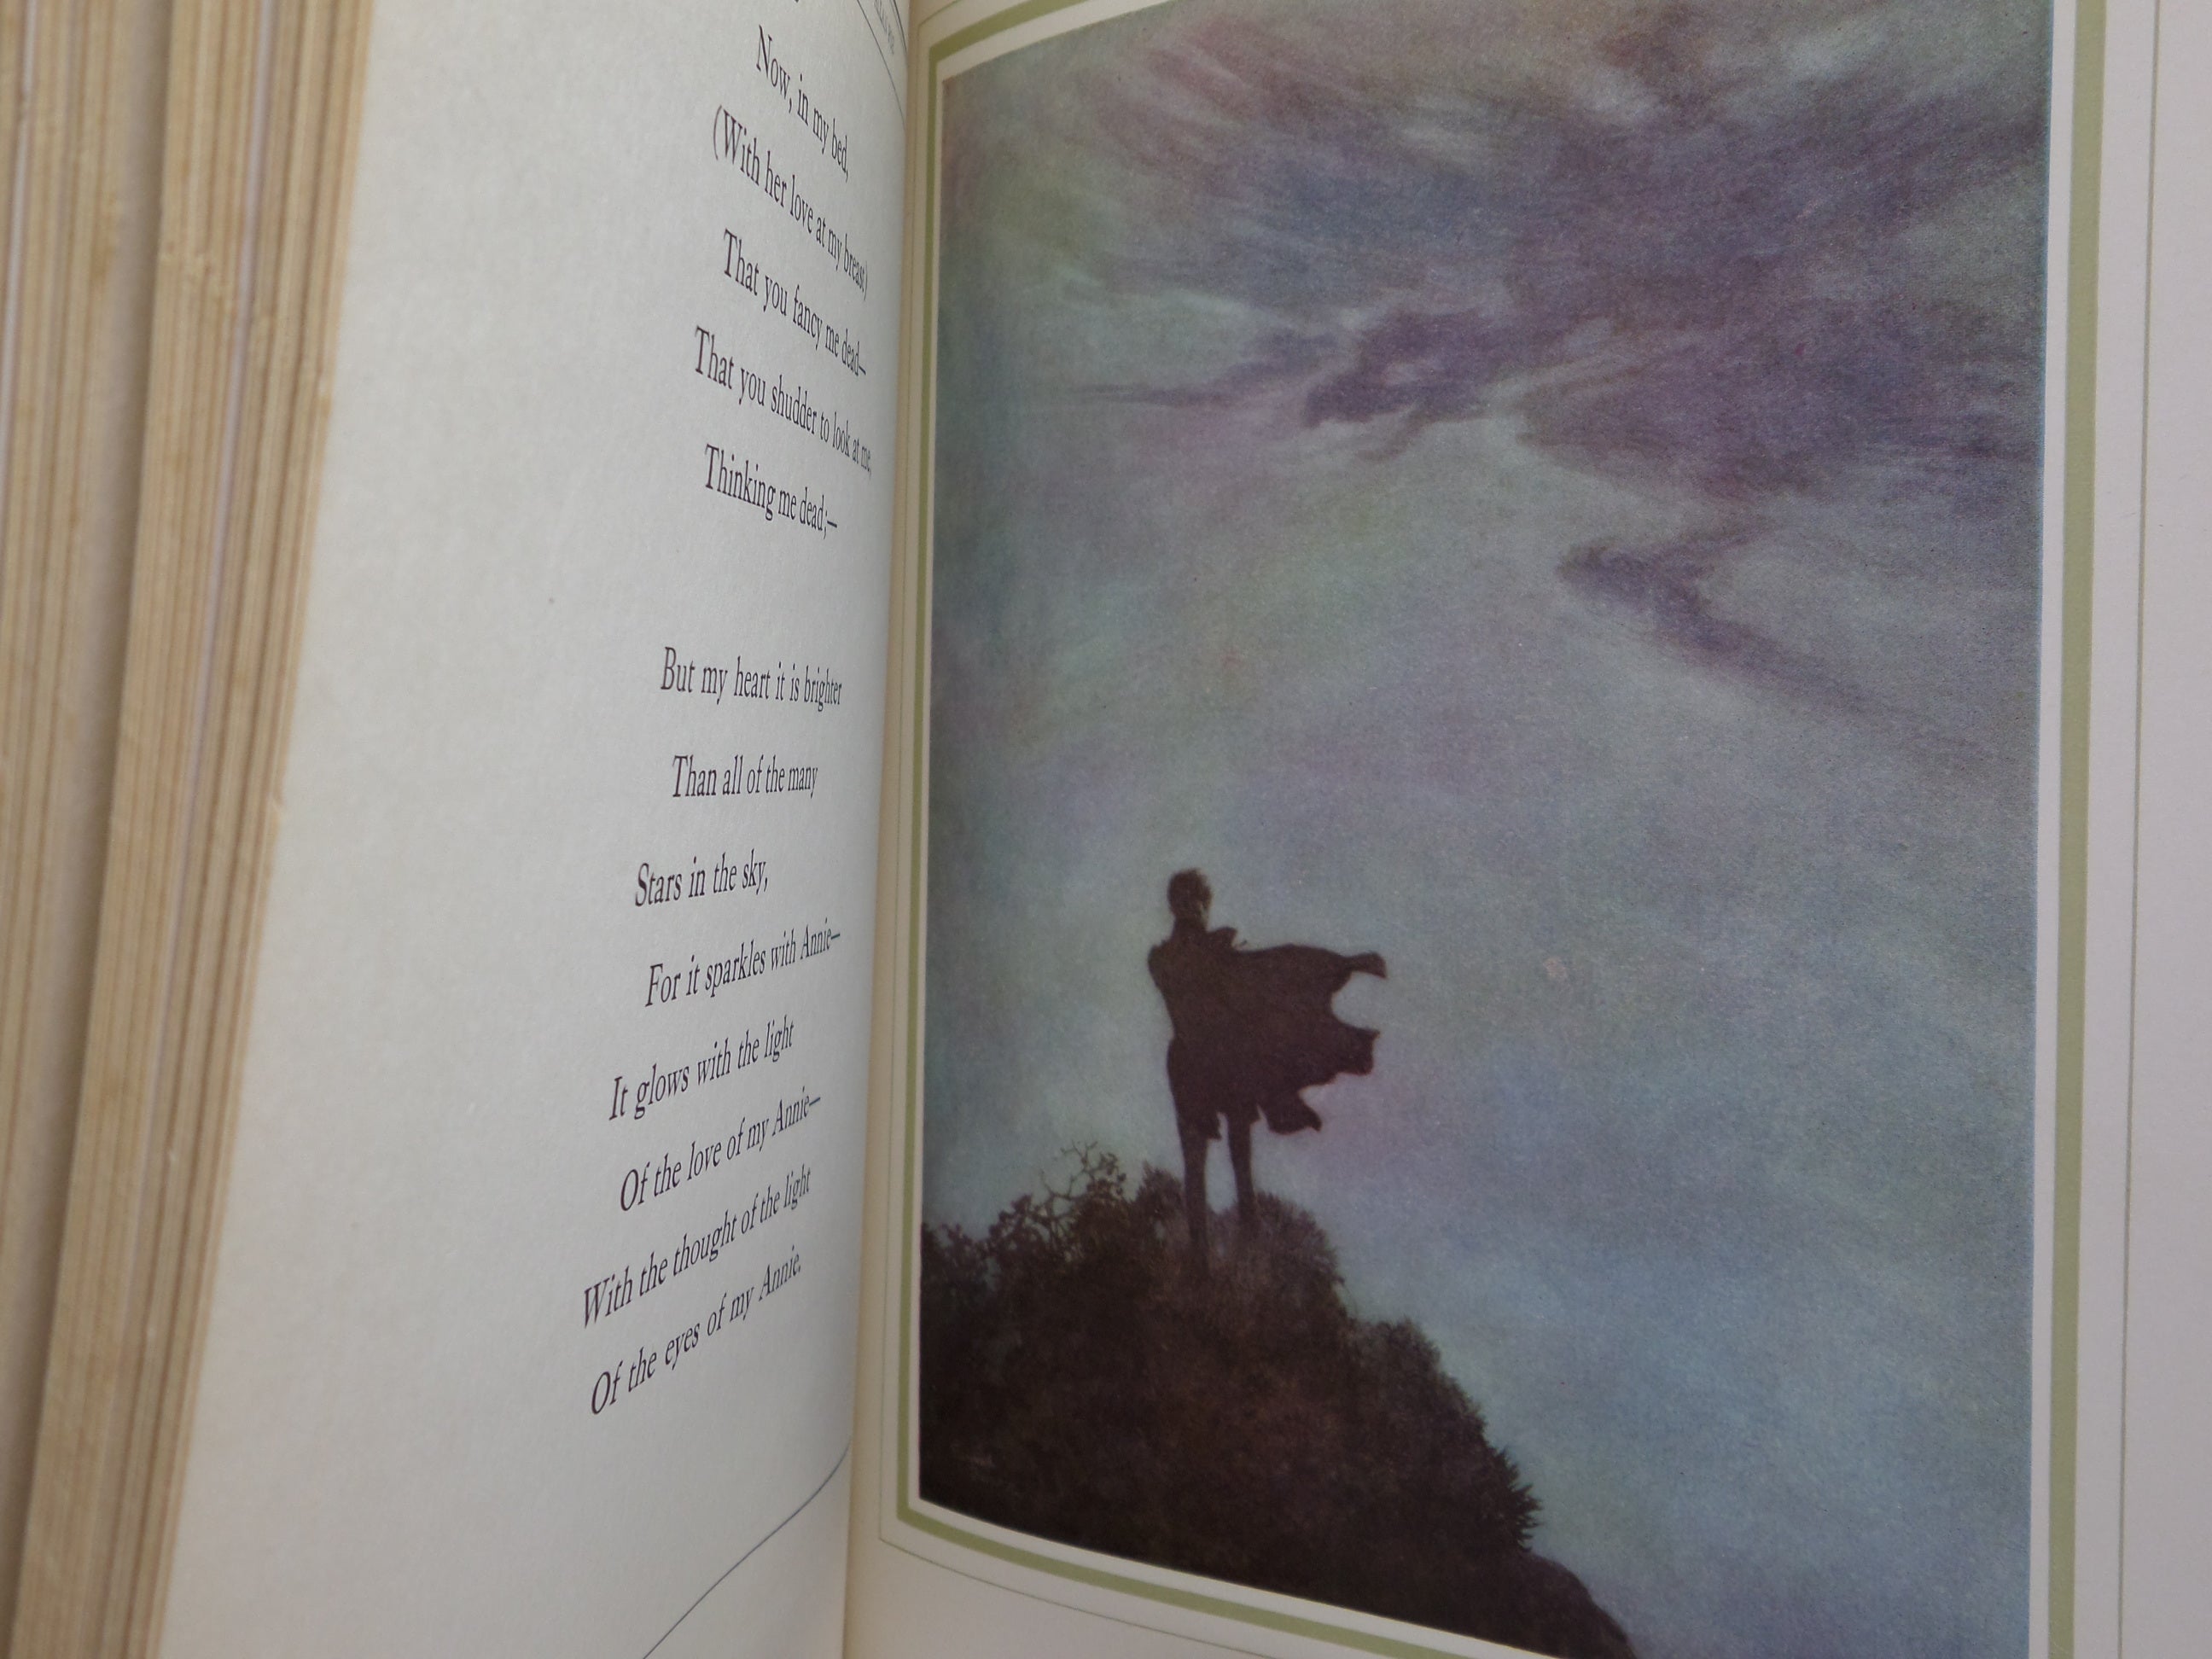 THE POETICAL WORKS OF EDGAR ALLAN POE, LEATHER-BOUND, EDMUND DULAC ILLUSTRATIONS